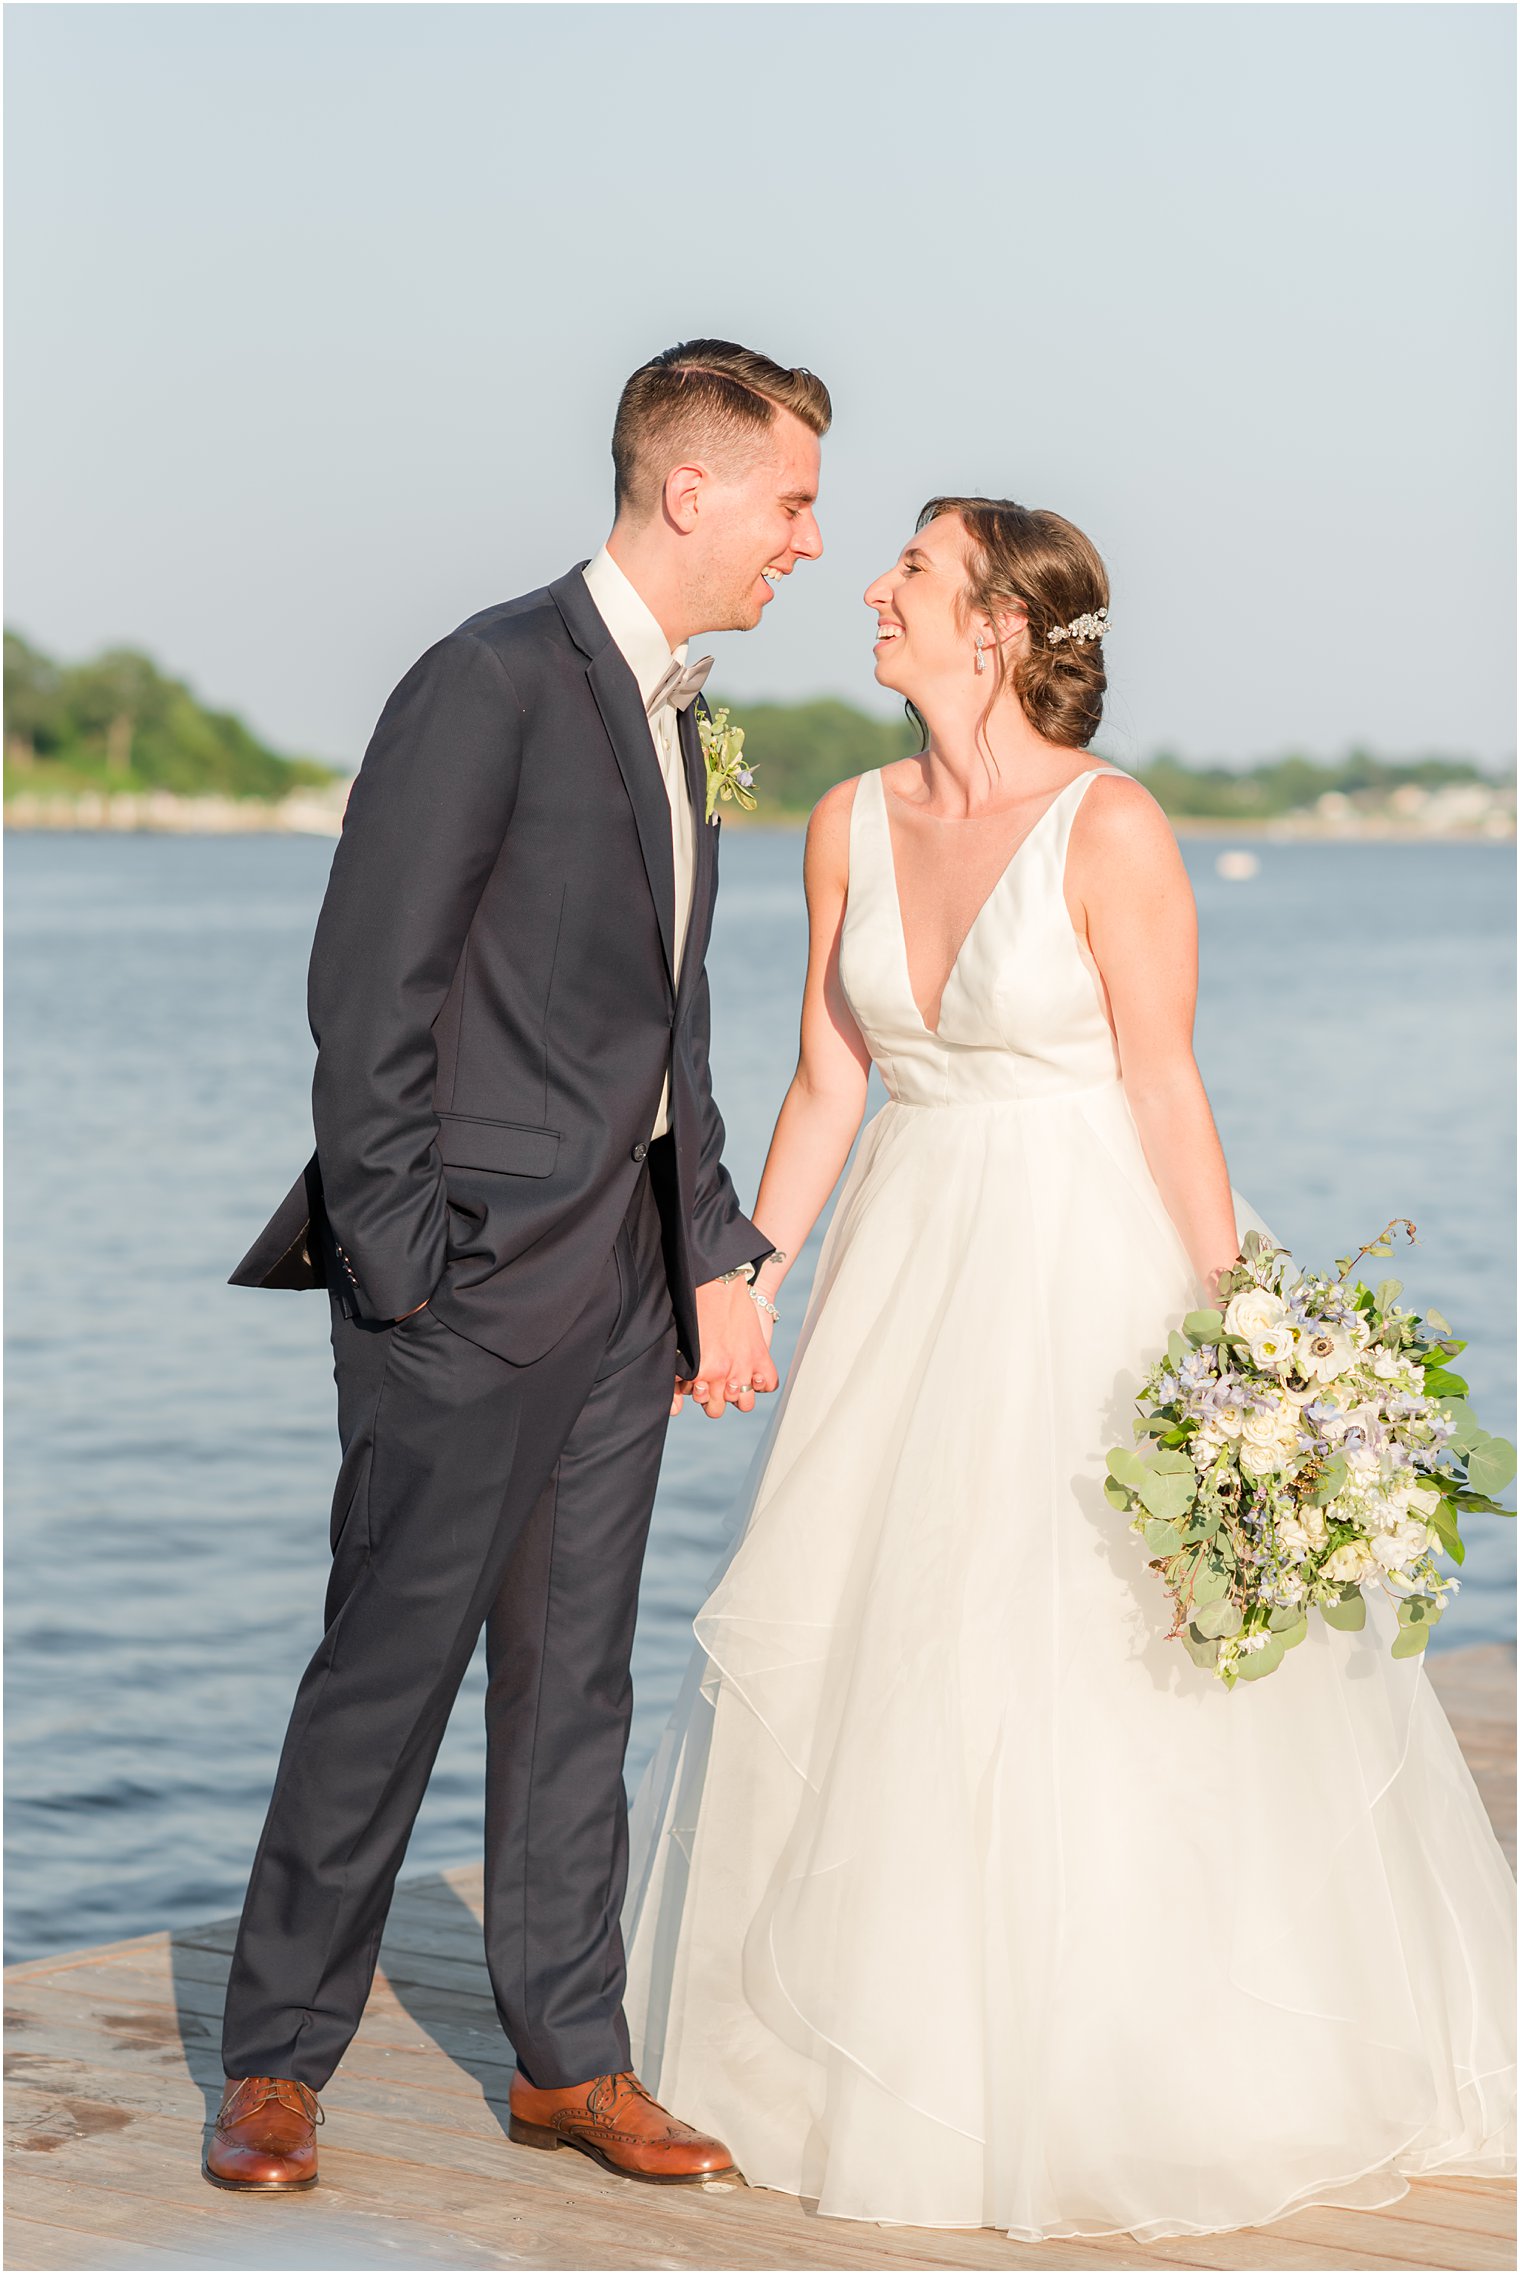 newlyweds laugh leaning together on wooden dock